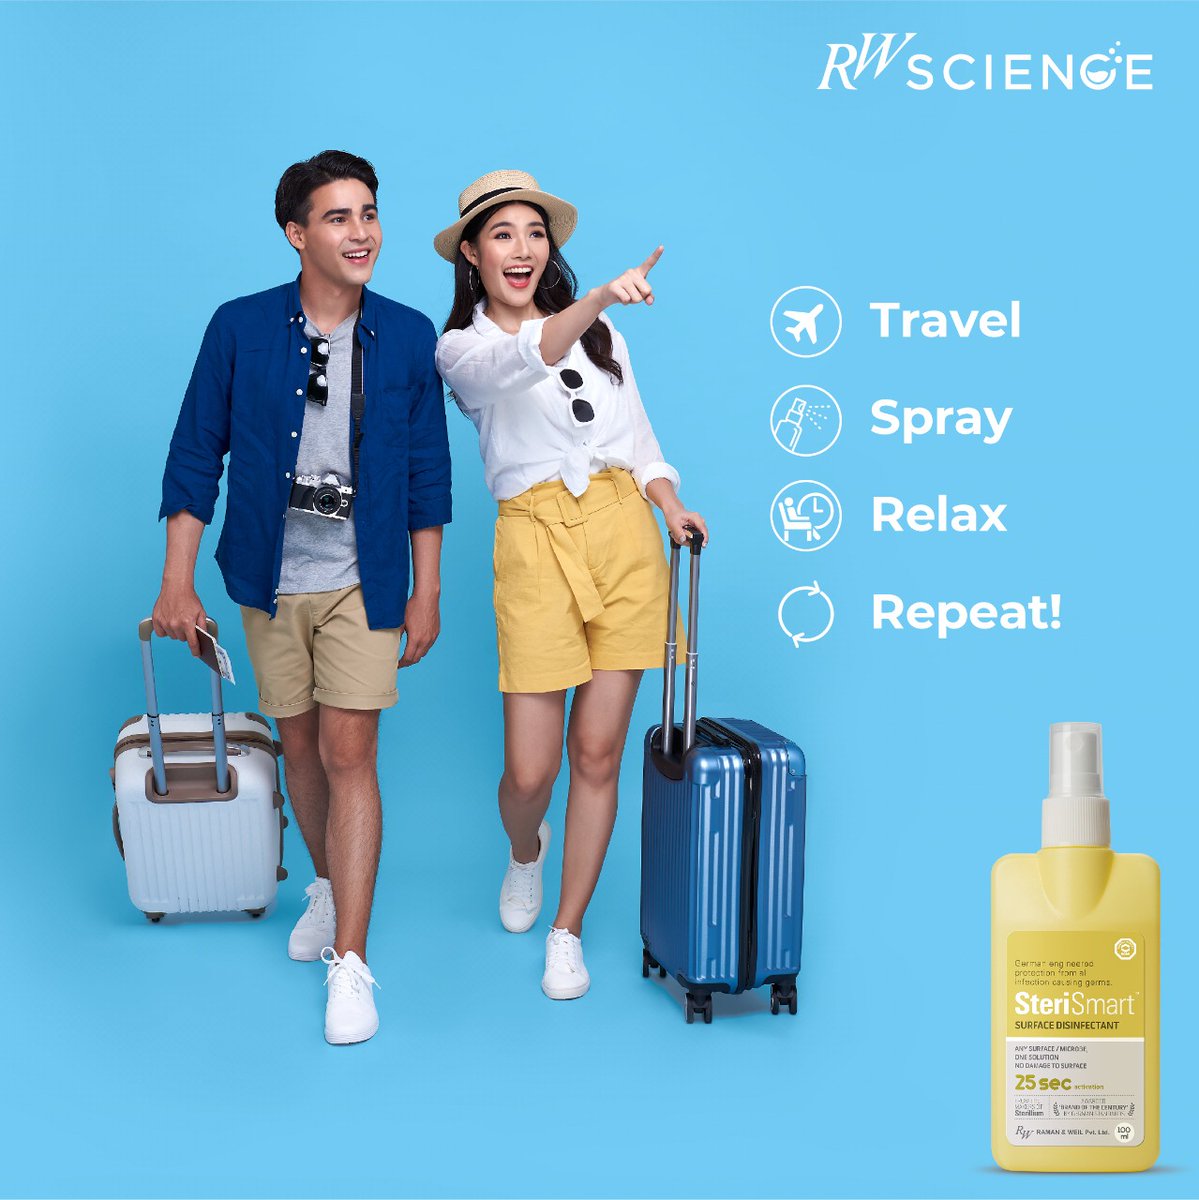 Meet your new travel buddy SteriSmart. With travel-friendly packaging and an easy-to-use spray action that disinfects any surface in just 25 seconds.

#RWScience #IndianScience #madeinindia #care #Wash #science #healthexperts #doctors #medical #trusted #stayhealthy #WHO #staysafe